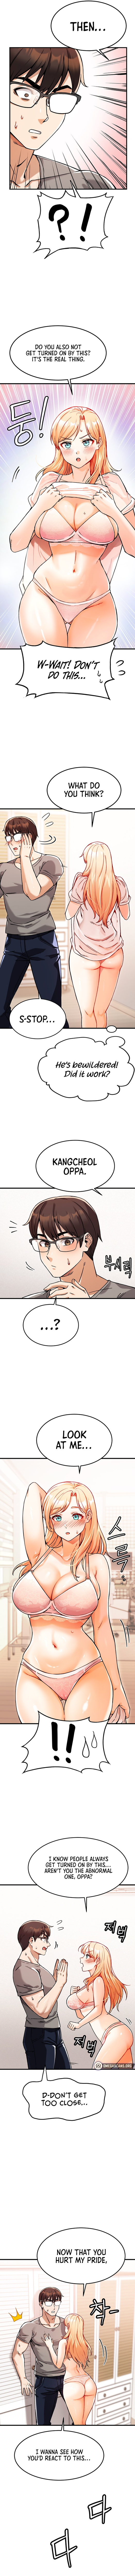 Kangcheol’s Bosses - Chapter 2 Page 8